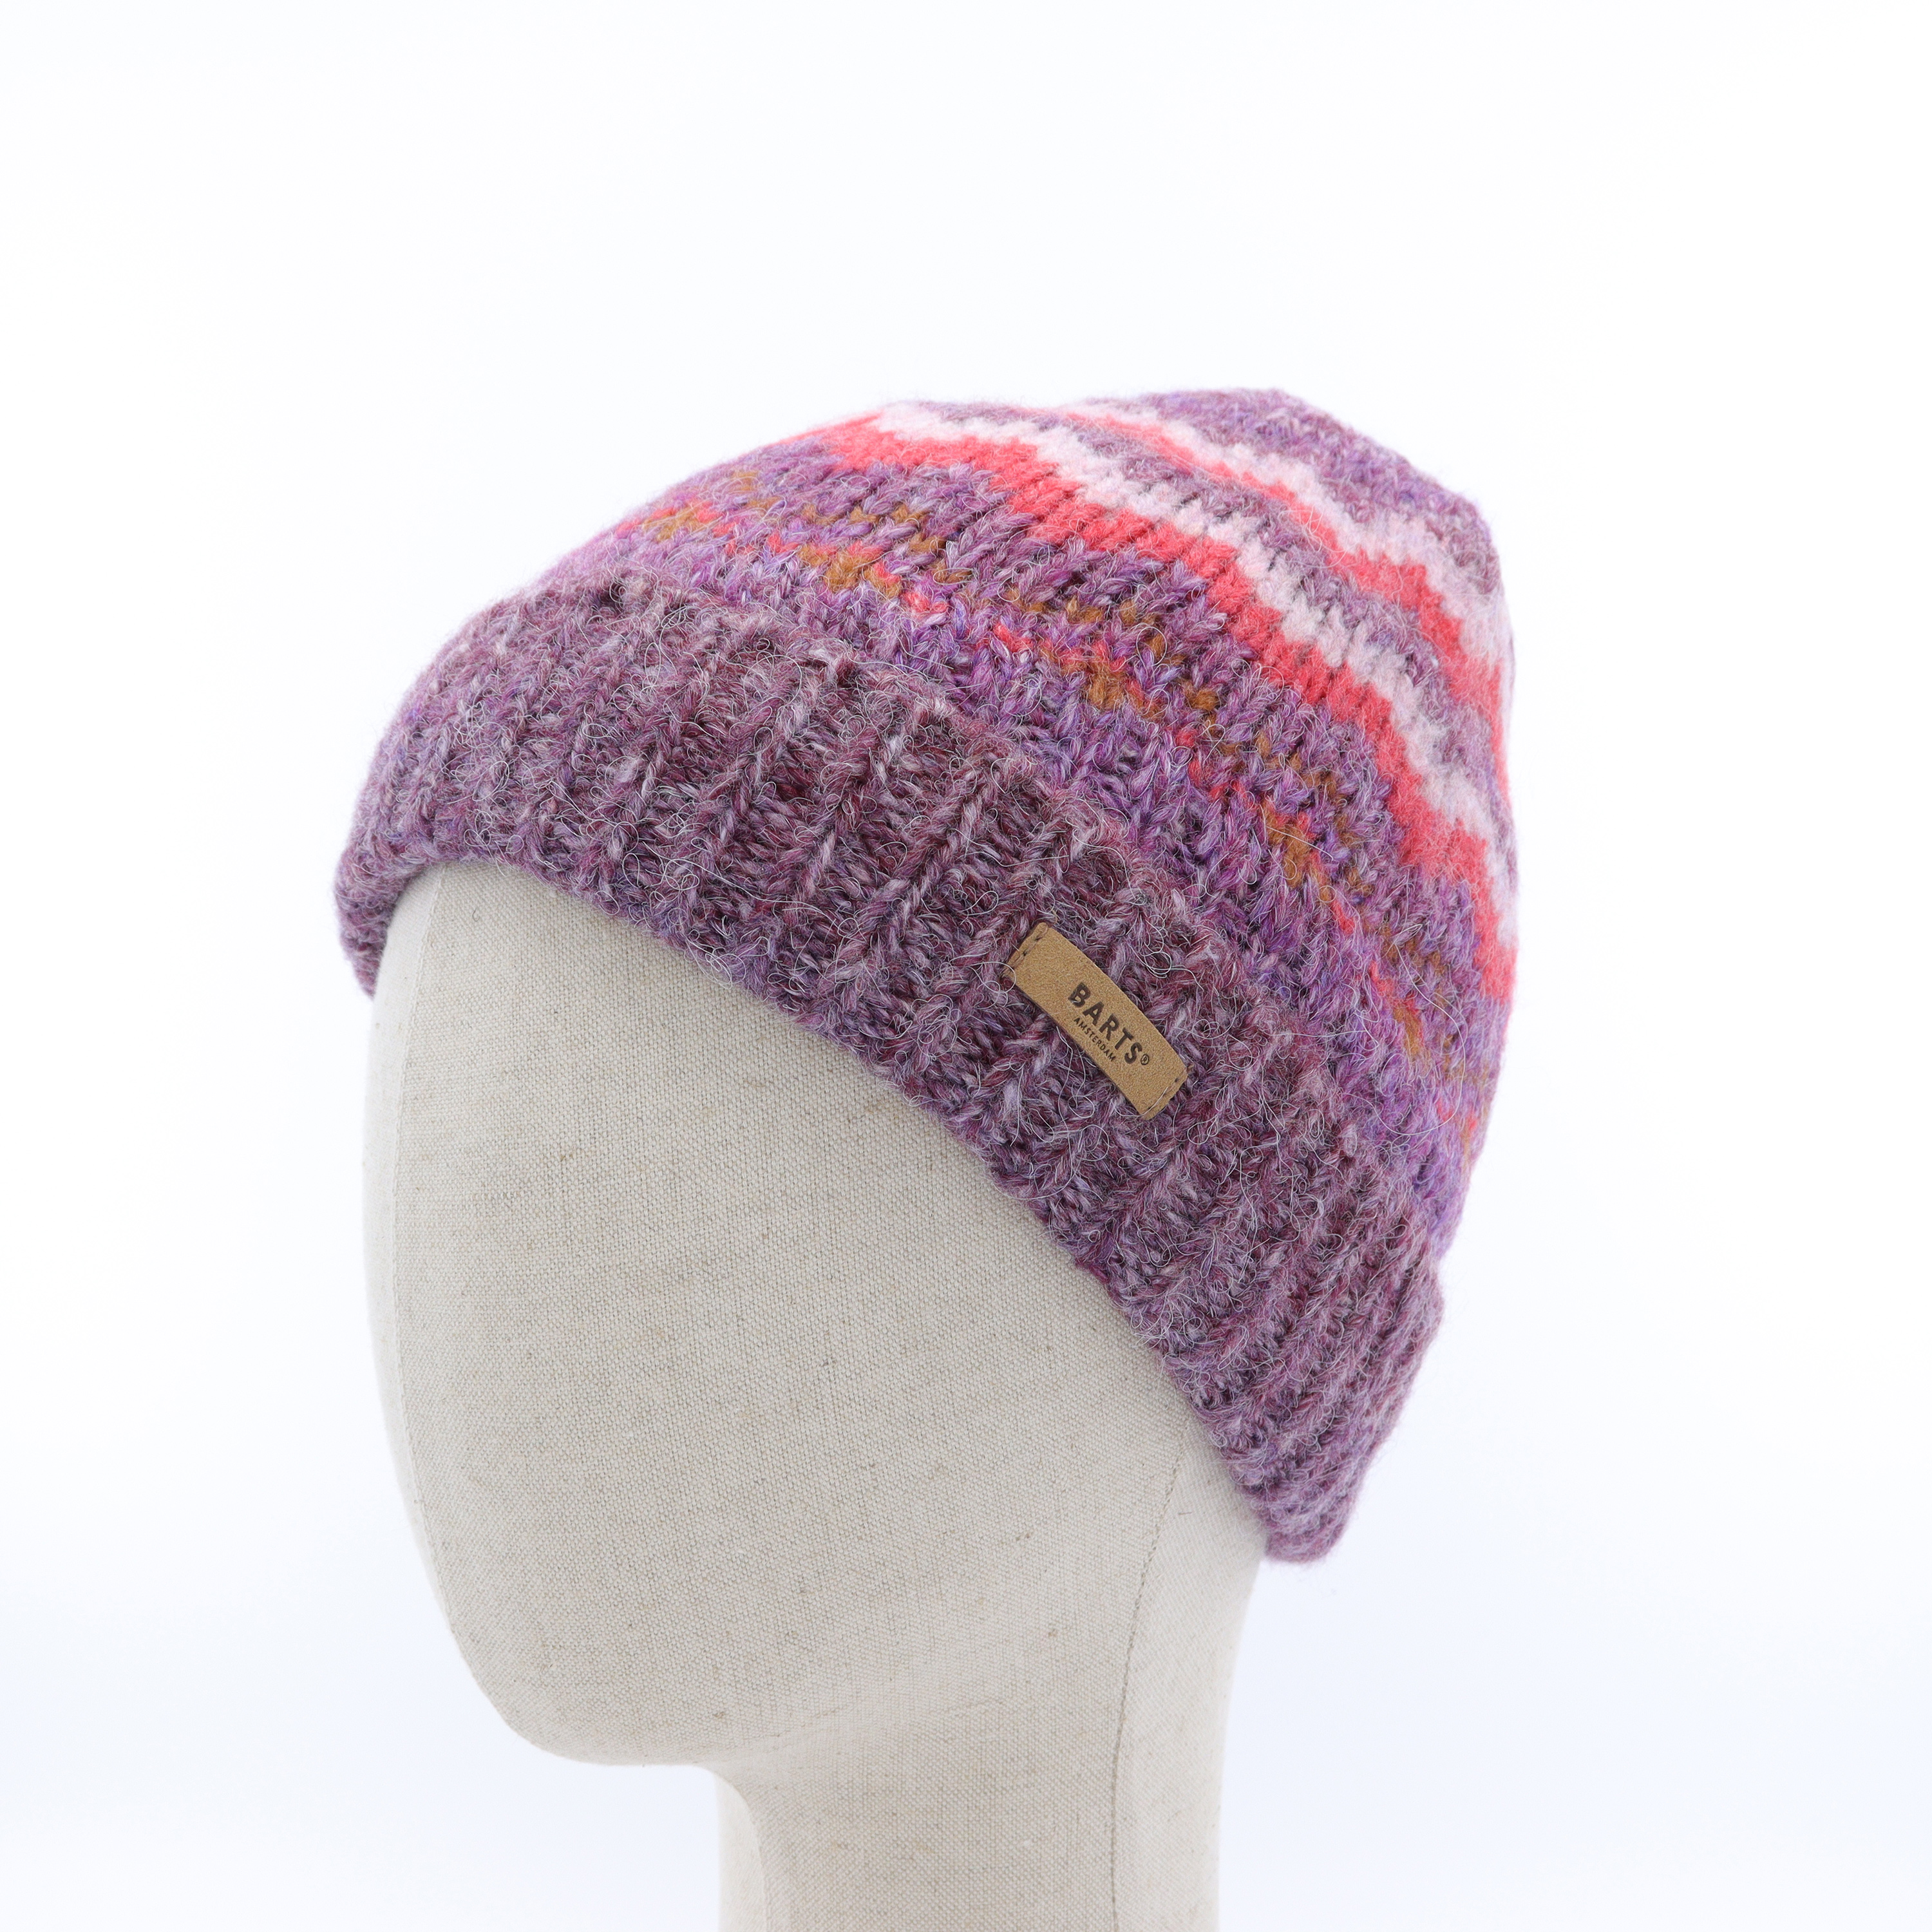 BeanieShop | Pink Stock, Cornwall - from Beanies UK Shipped